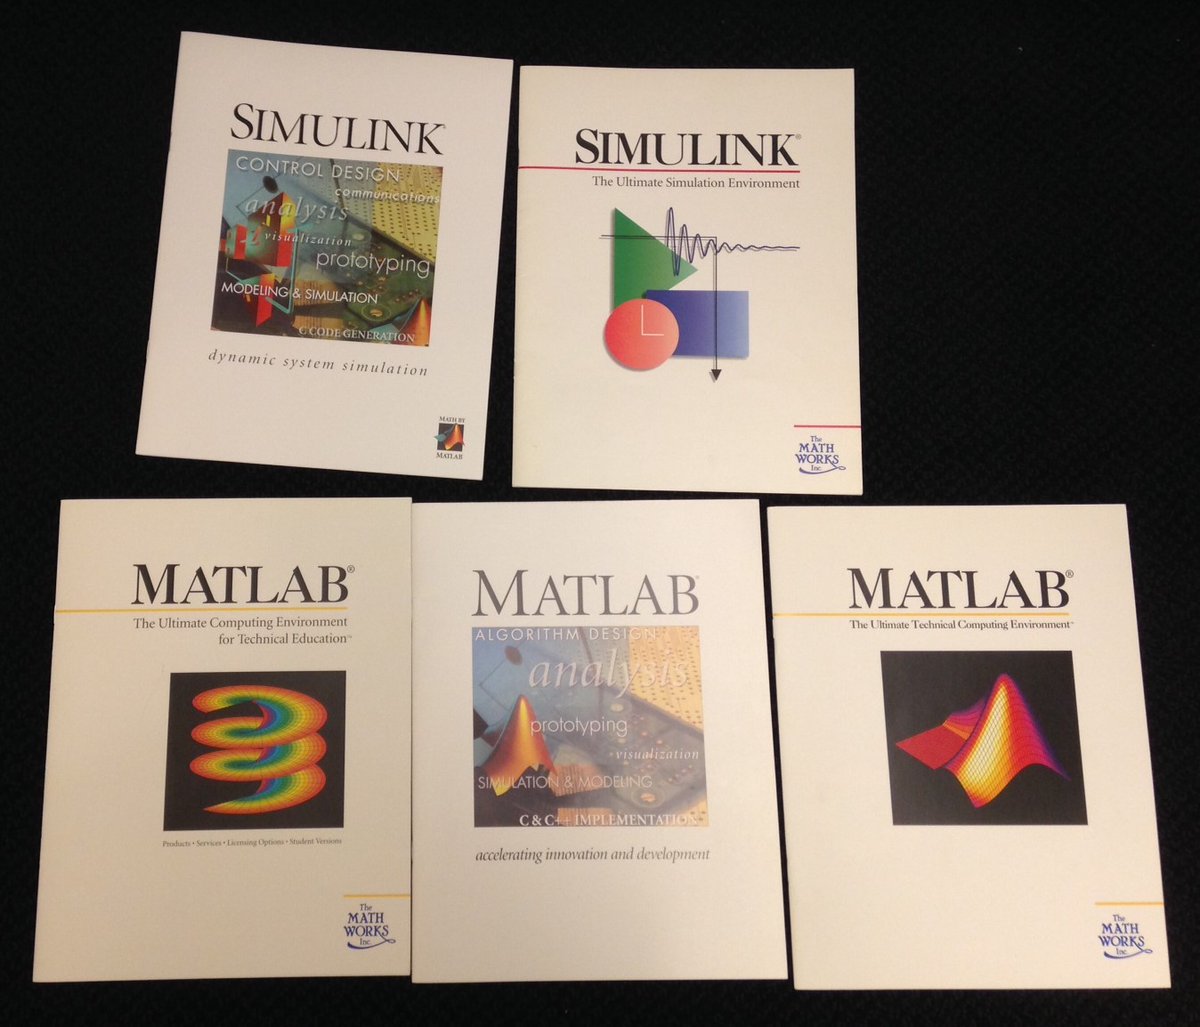 Found in the archives...MATLAB and Simulink prints 🤩